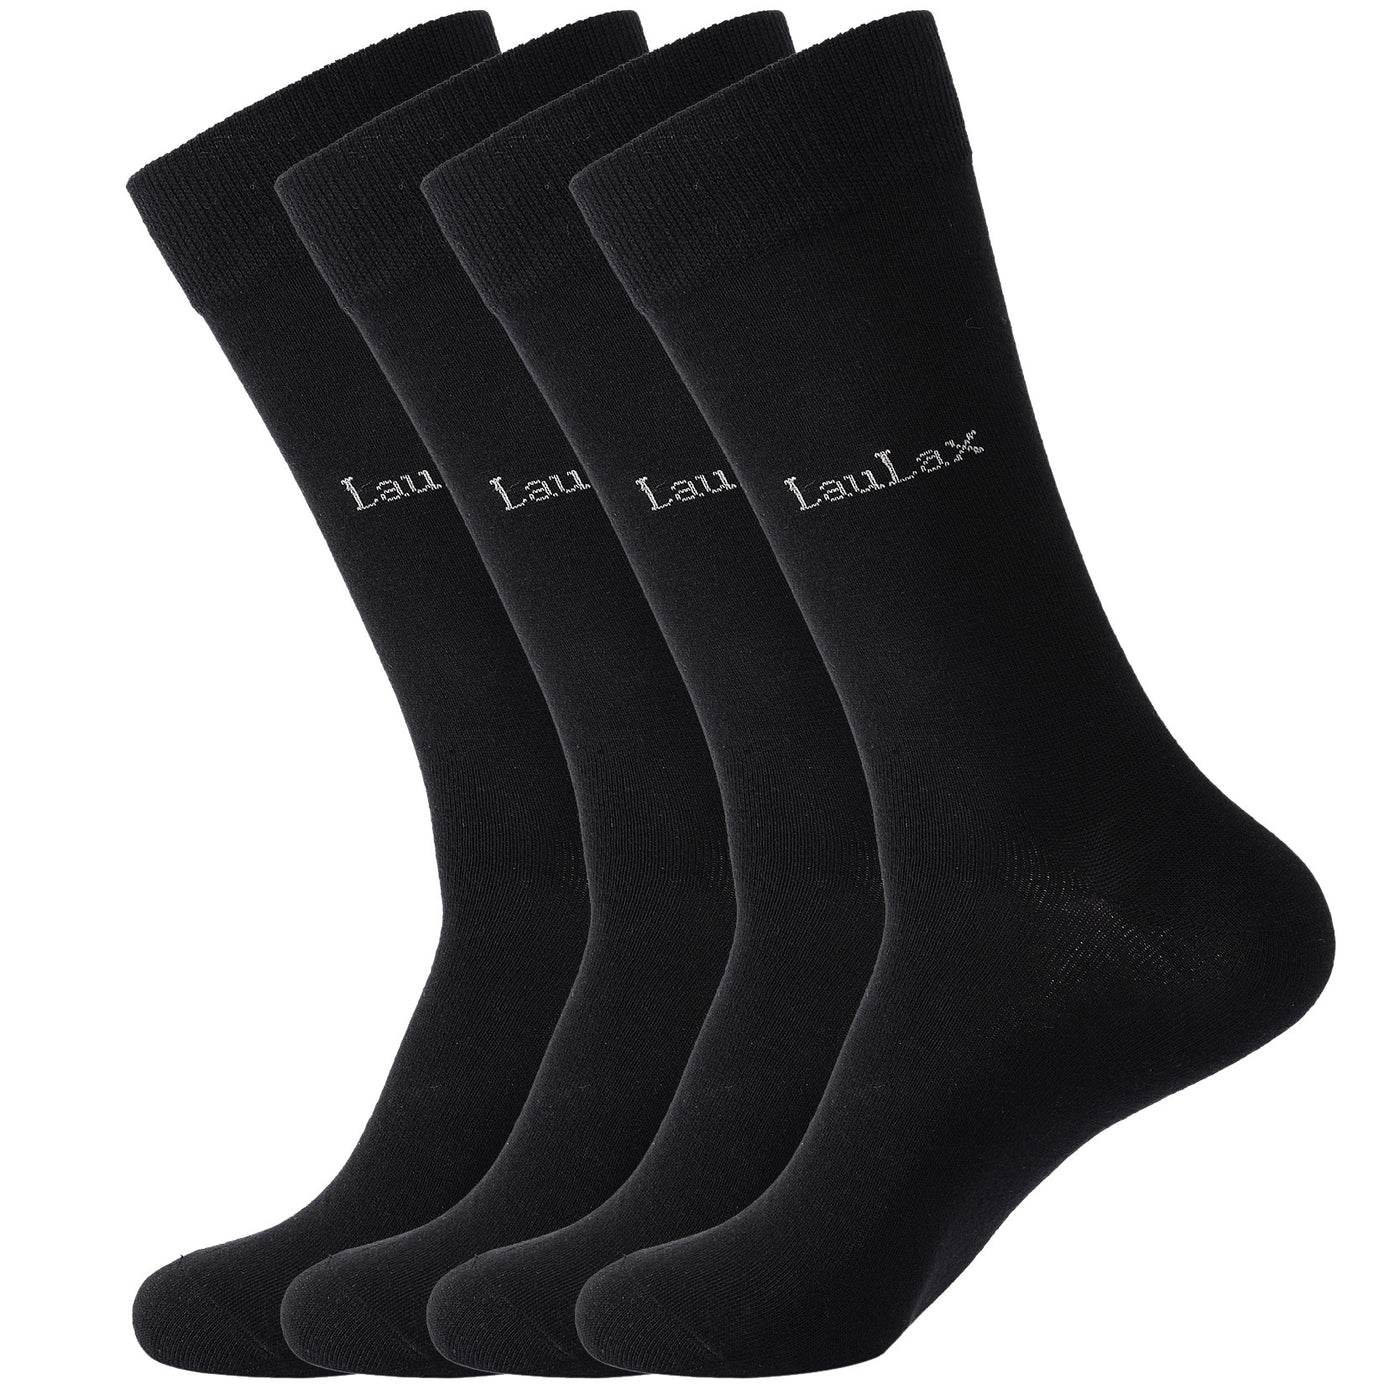 4 Pairs Finest Combed Cotton Smooth Seamless Toe Business Socks, Black, Gift Set